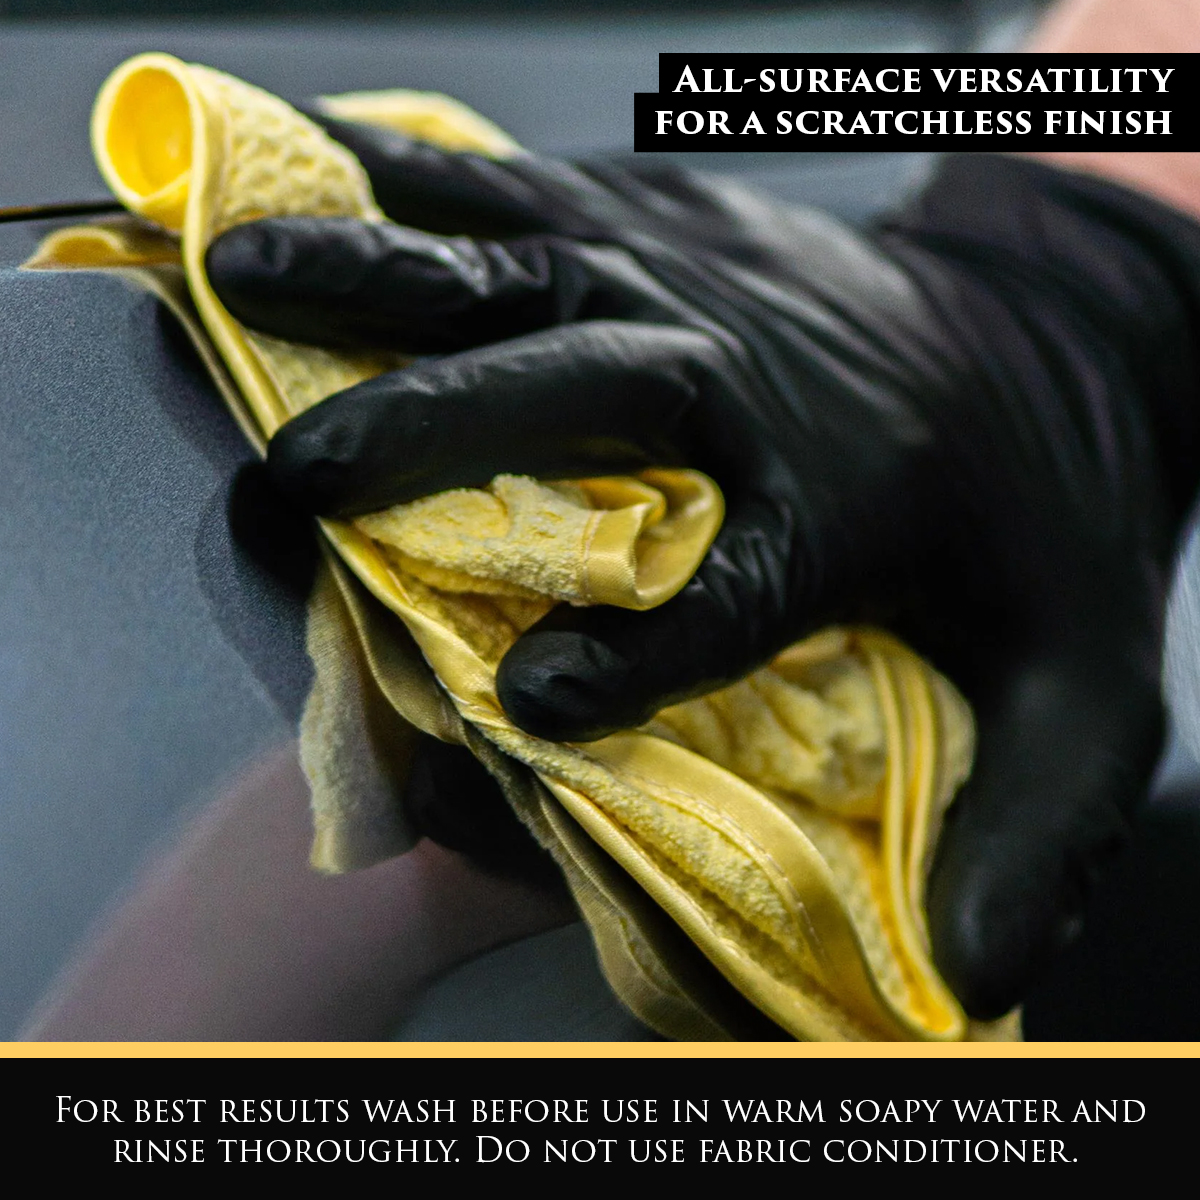 Image shows the yellow Car Gods Microfibre Drying Cloth being used to dry a vehicle’s exterior. Text: For best results wash the cloth in warm soapy water and rinse thoroughly before use. Do not use fabric conditioner.